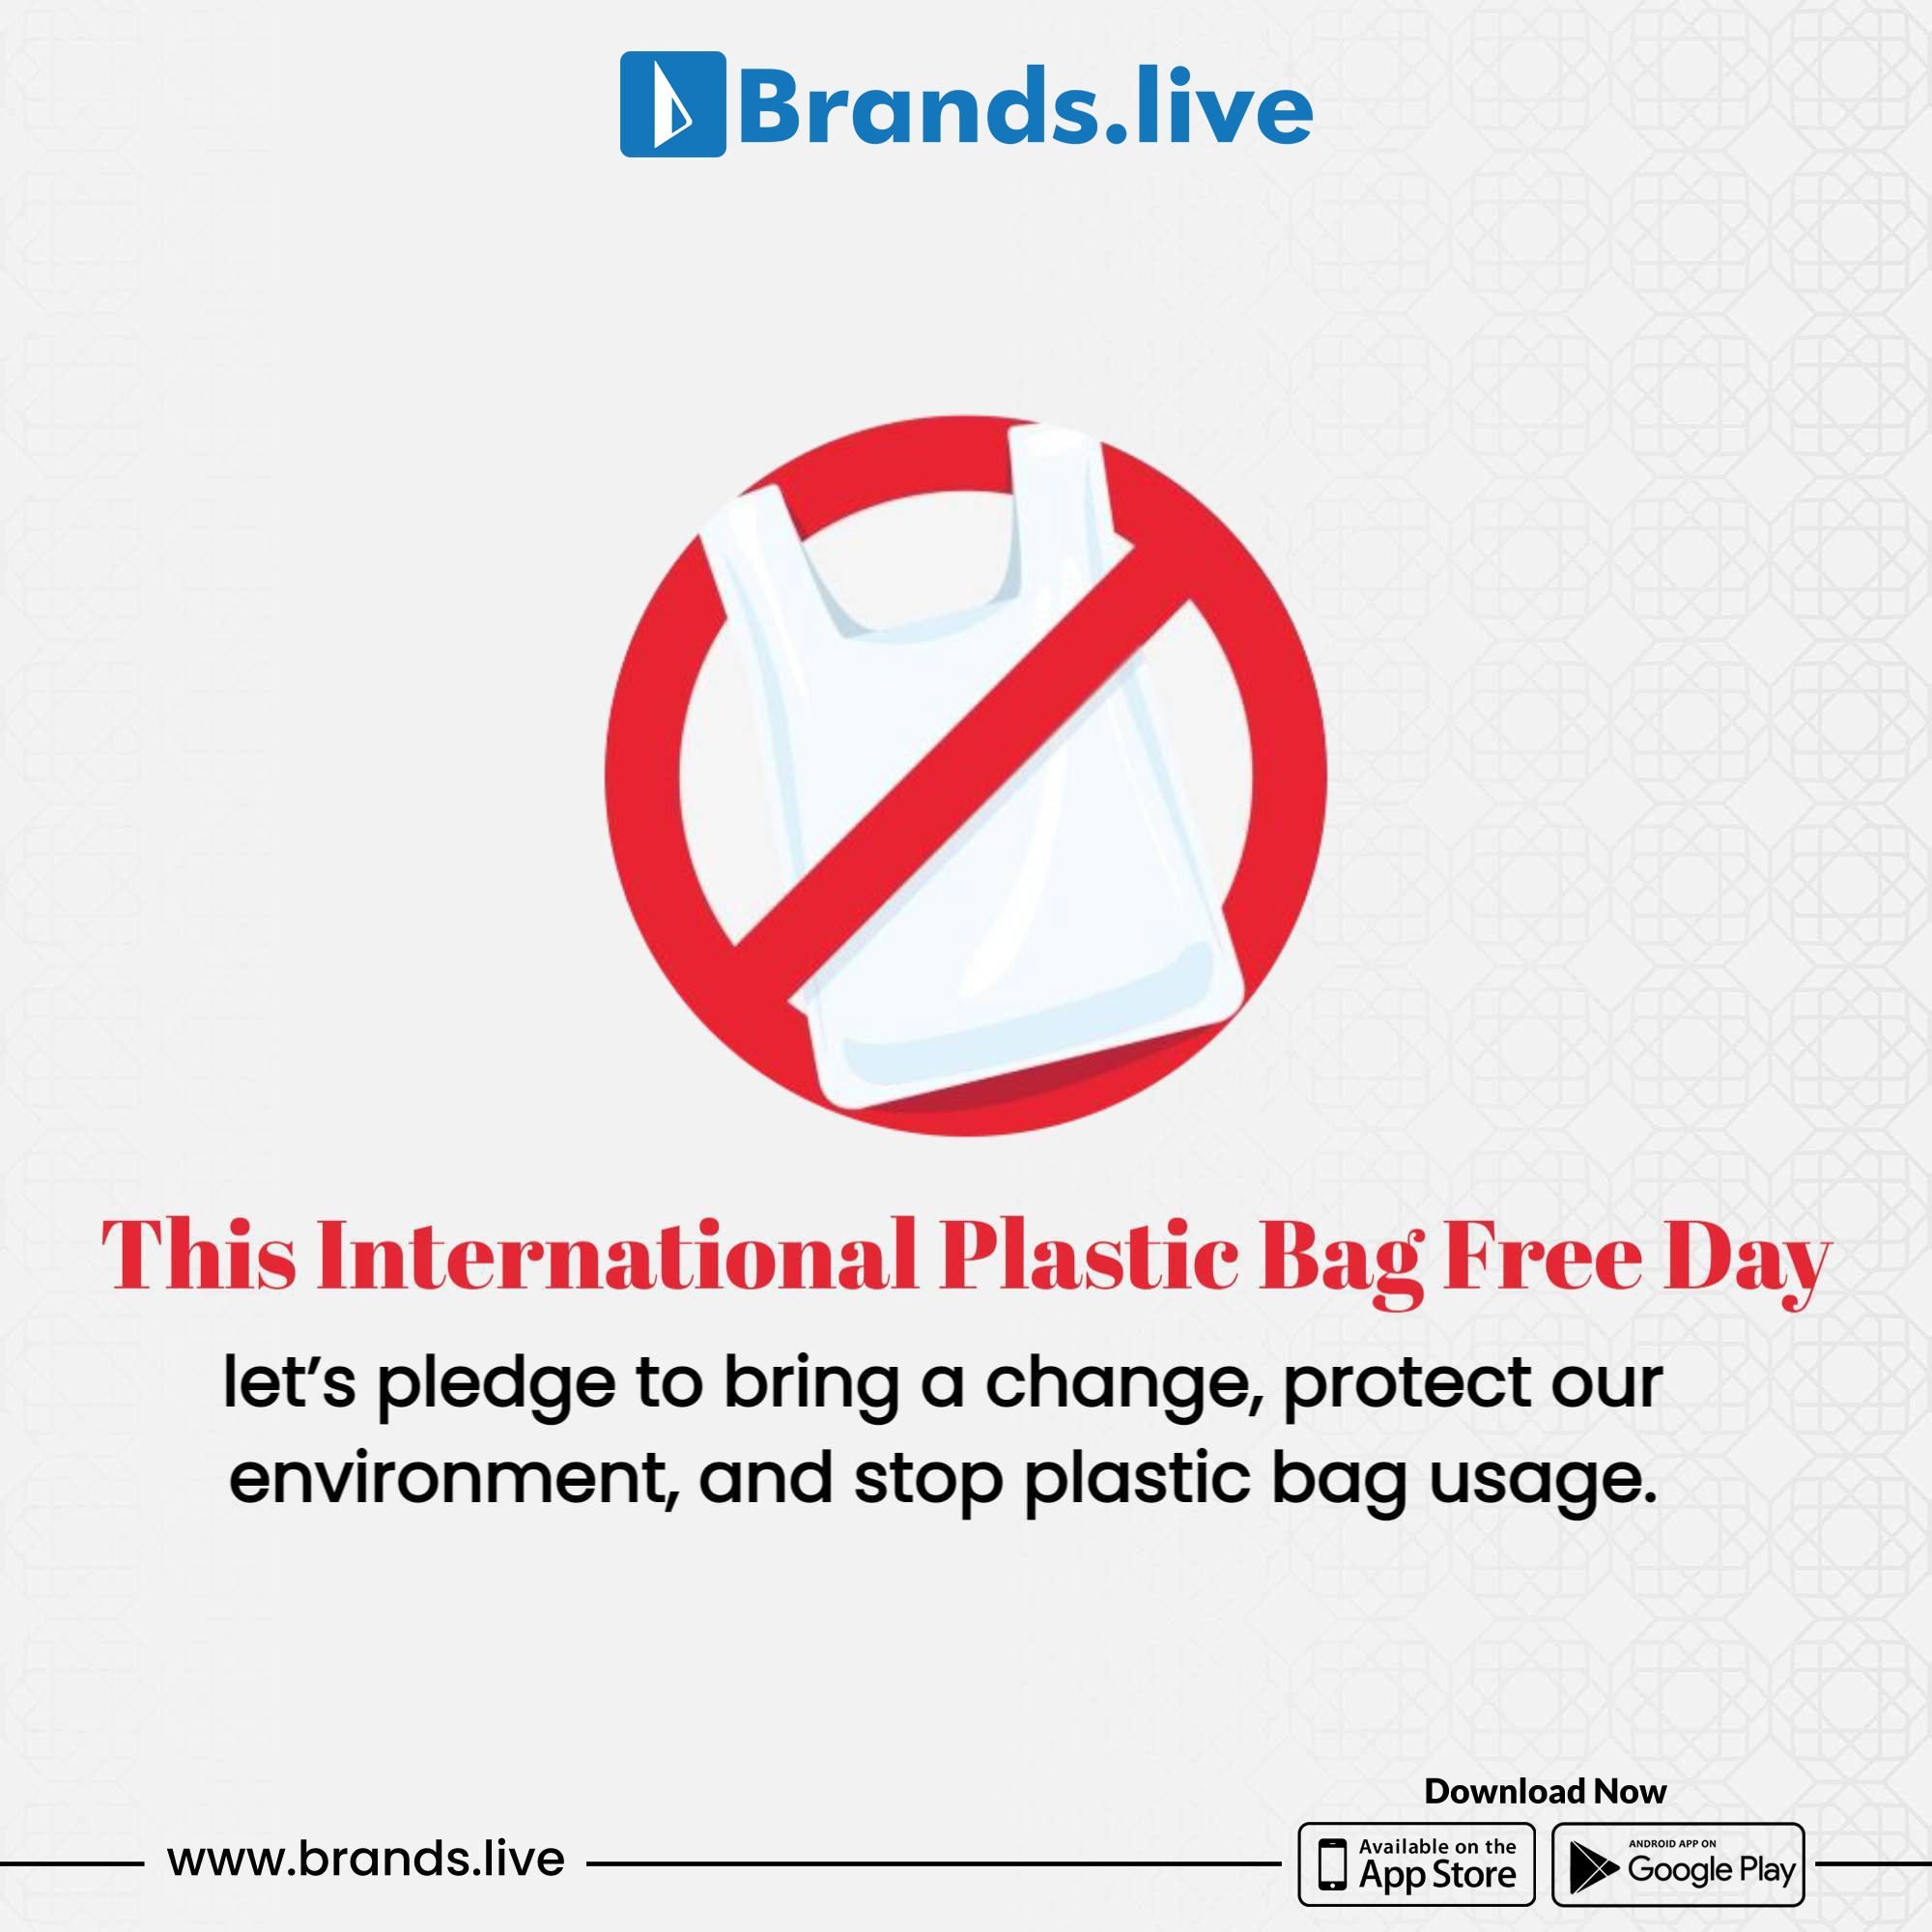 International Plastic Bag Free Day Post for your business